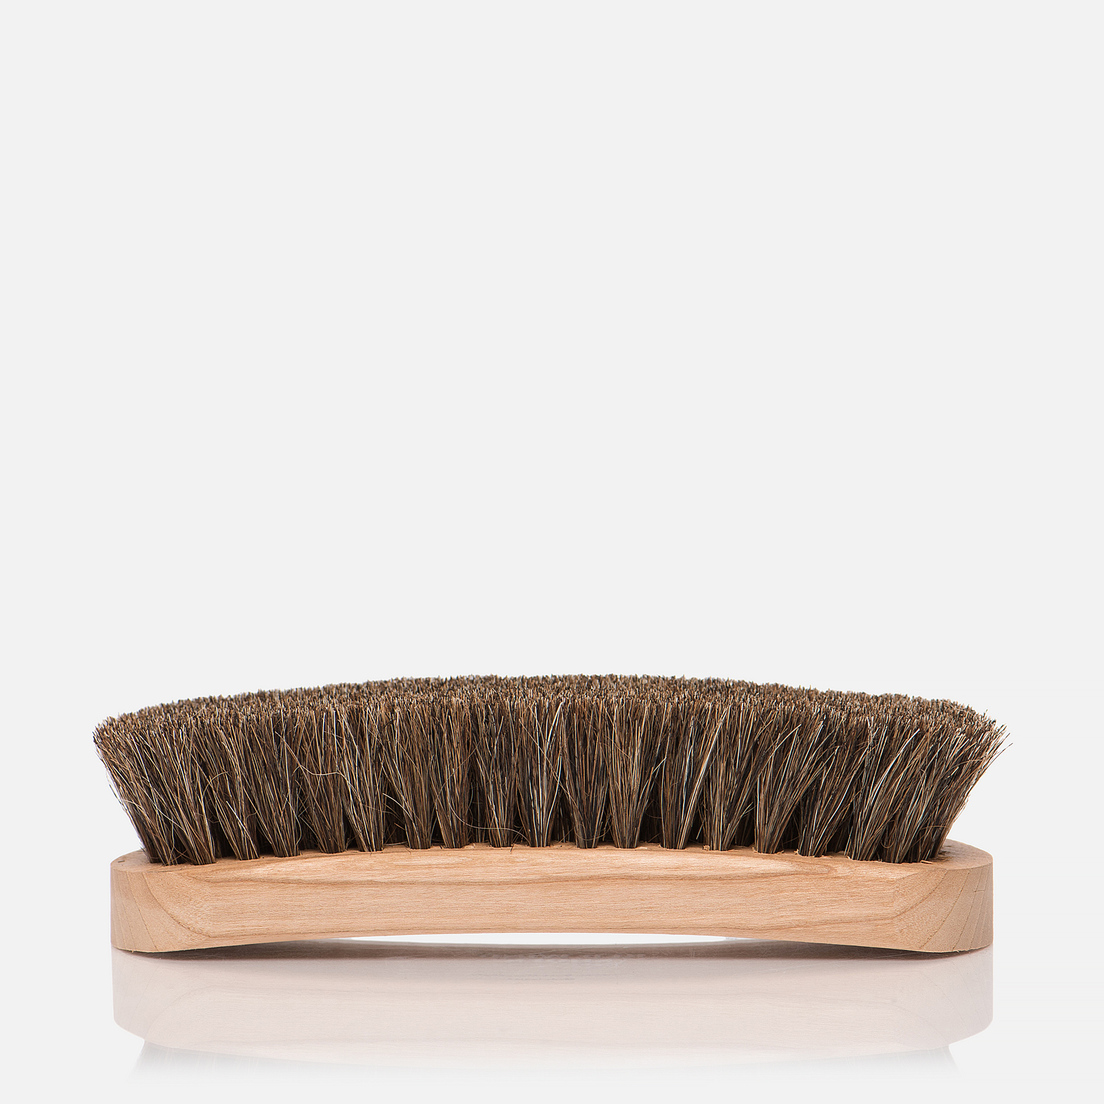 Red Wing Shoes Щетка для обуви Horse Hair Pure Brush